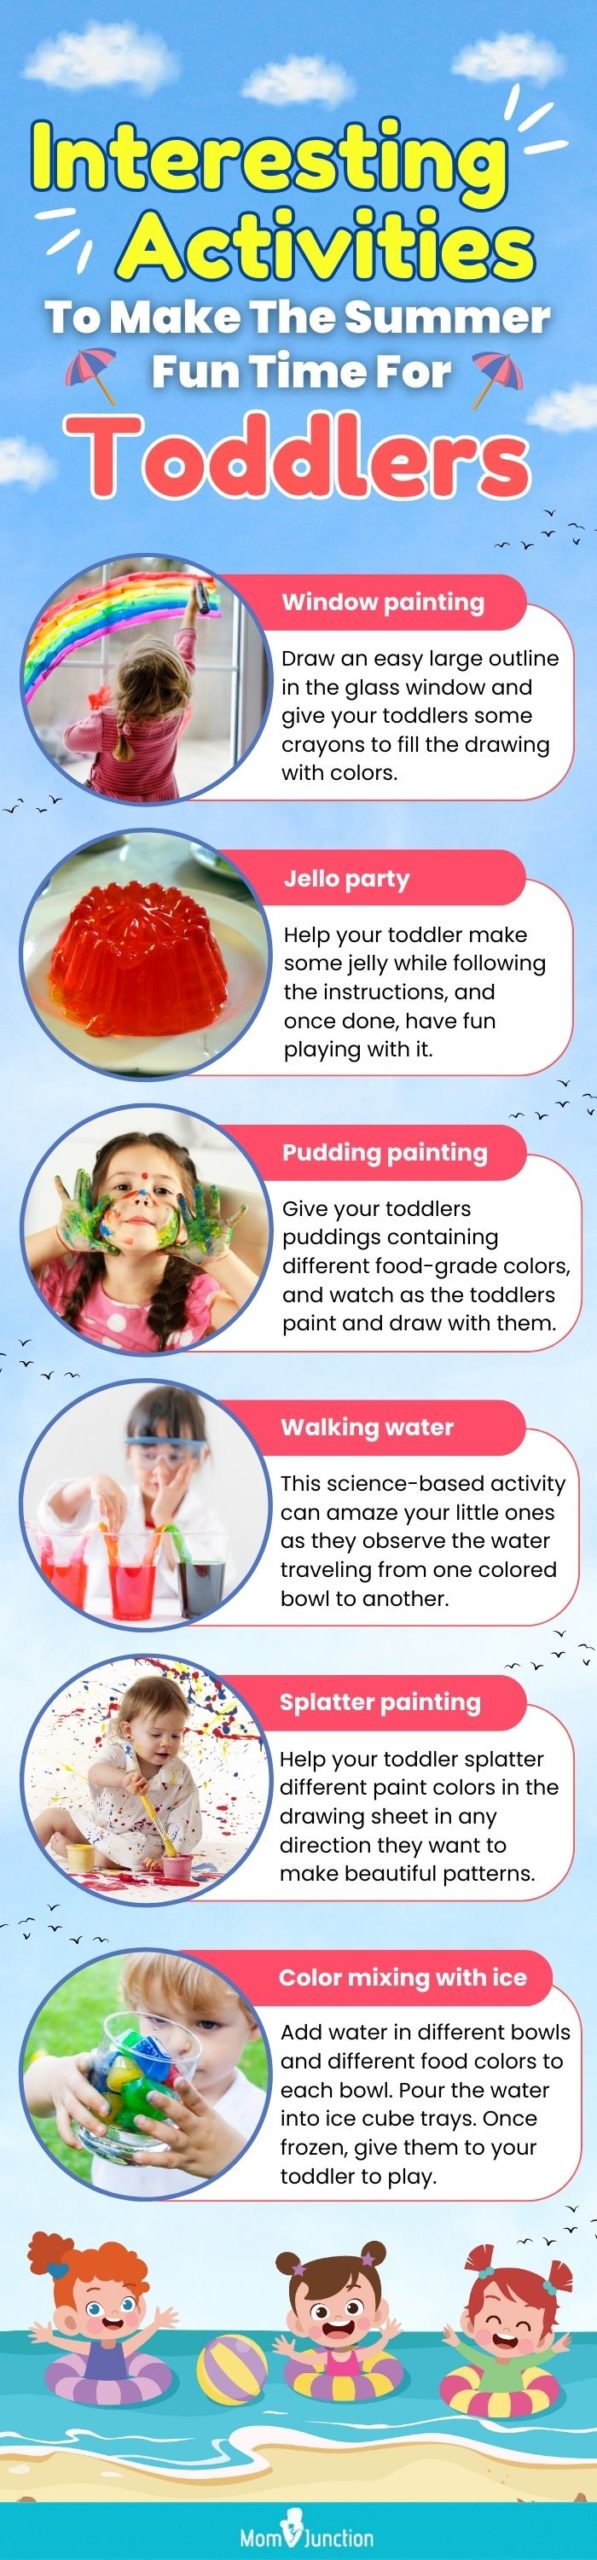 interesting activities to make the summer a fun time for toddlers (infographic)